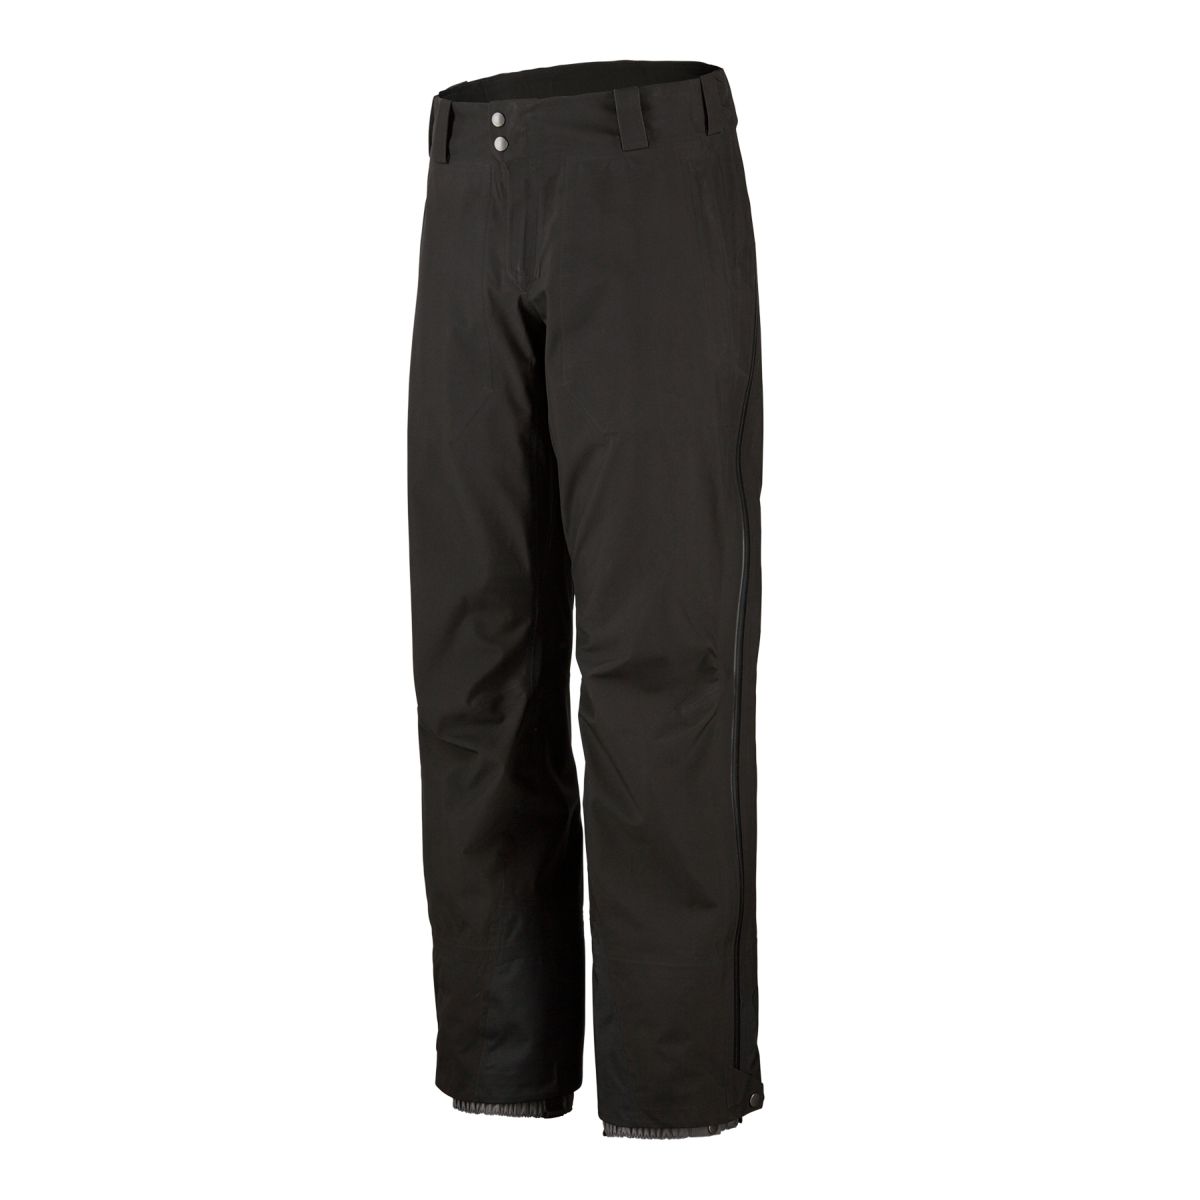 Triolet Pants - Men's from Patagonia